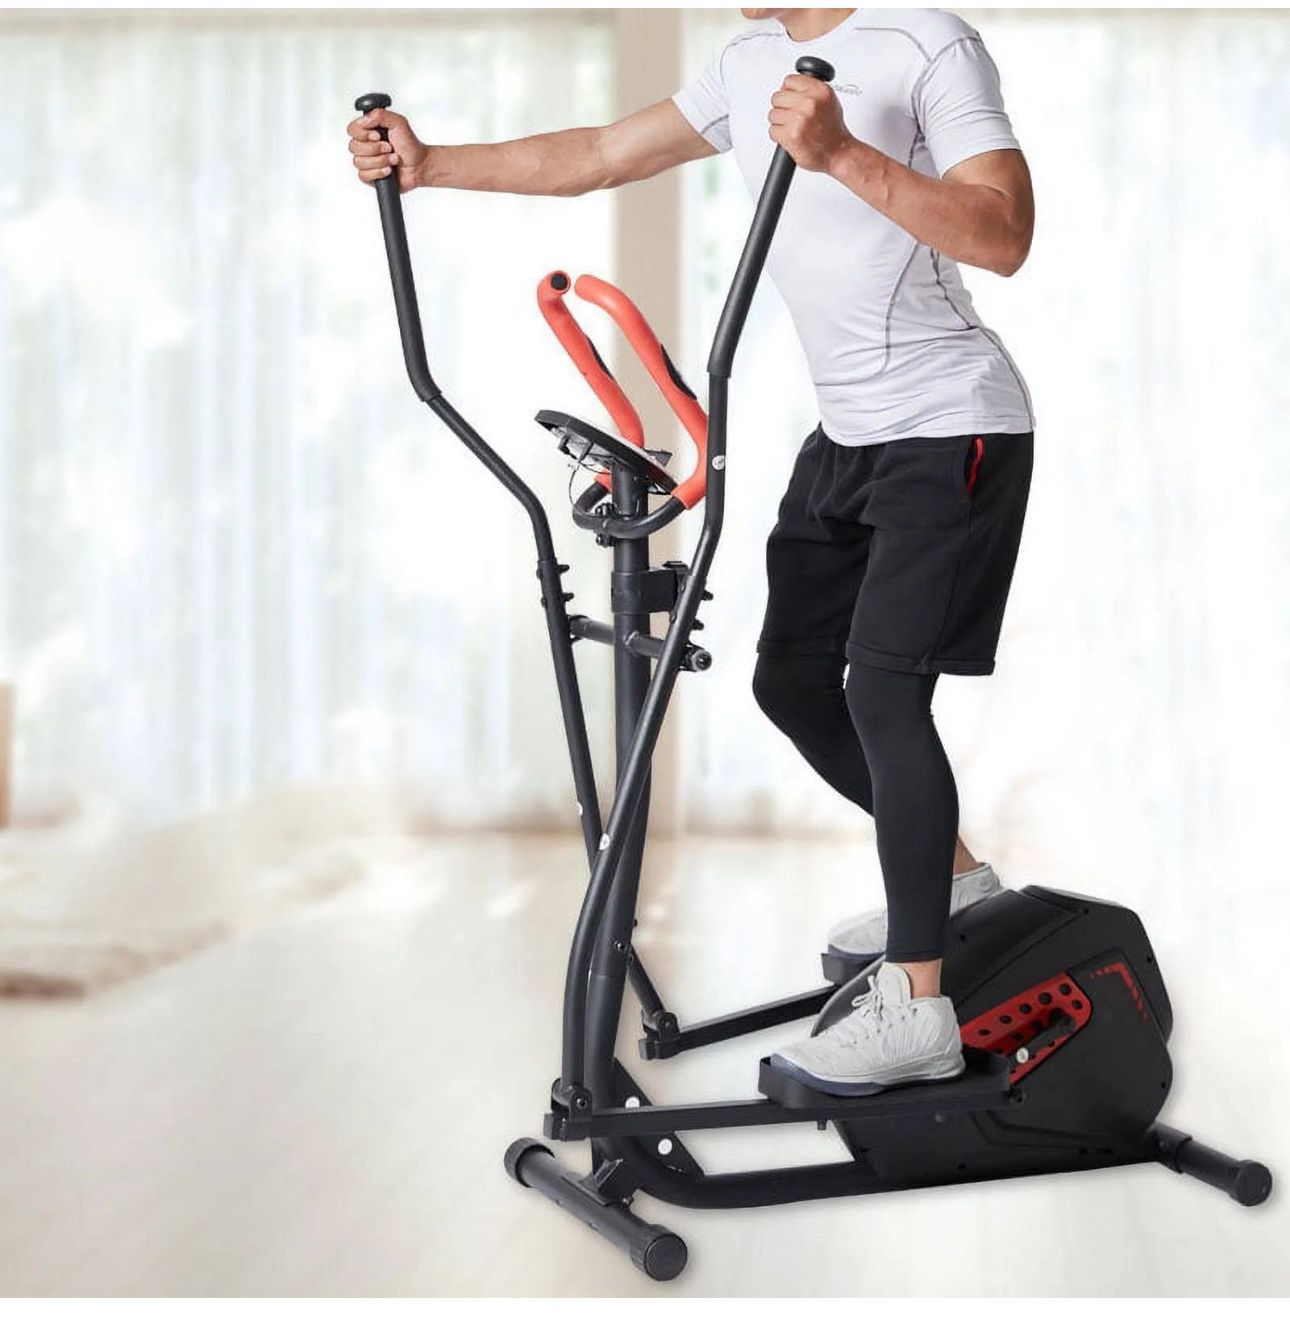 SKONYON Elliptical Machine Trainer Magnetic Smooth Quiet Driven with LCD Monitor